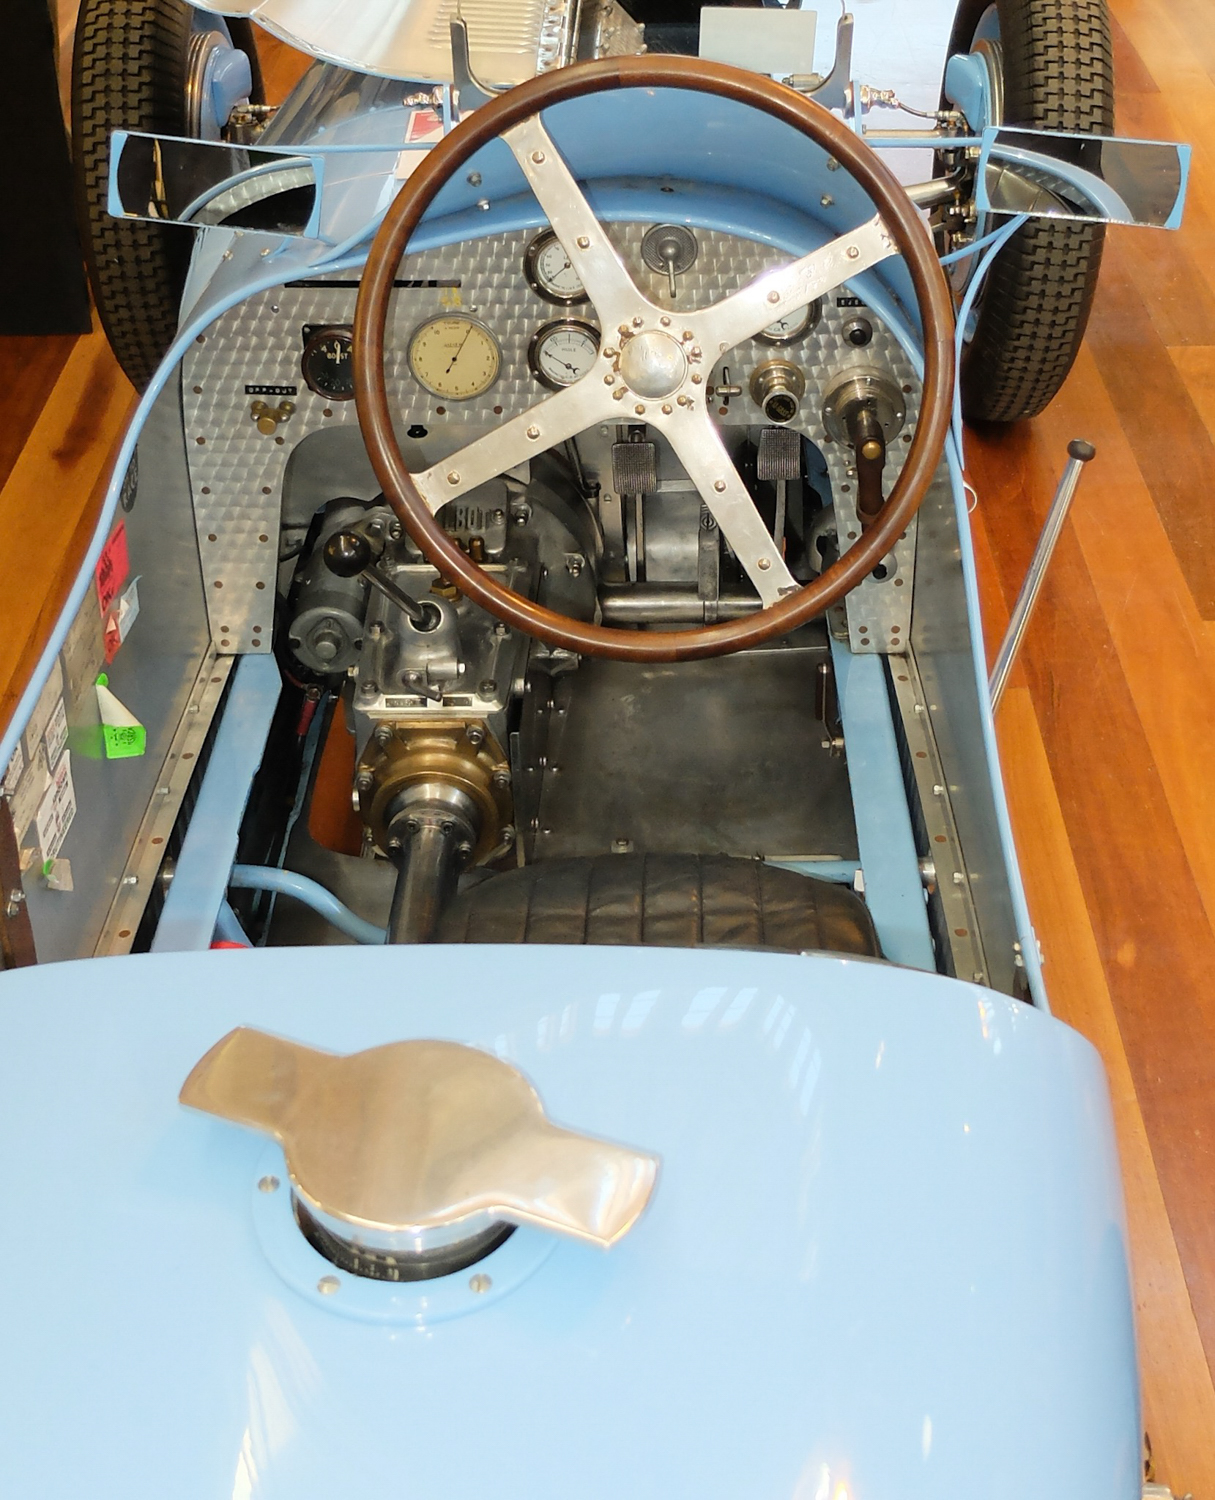 No creature comforts in the cockpit of this 1926 Talbot 700 Grand Prix racer.